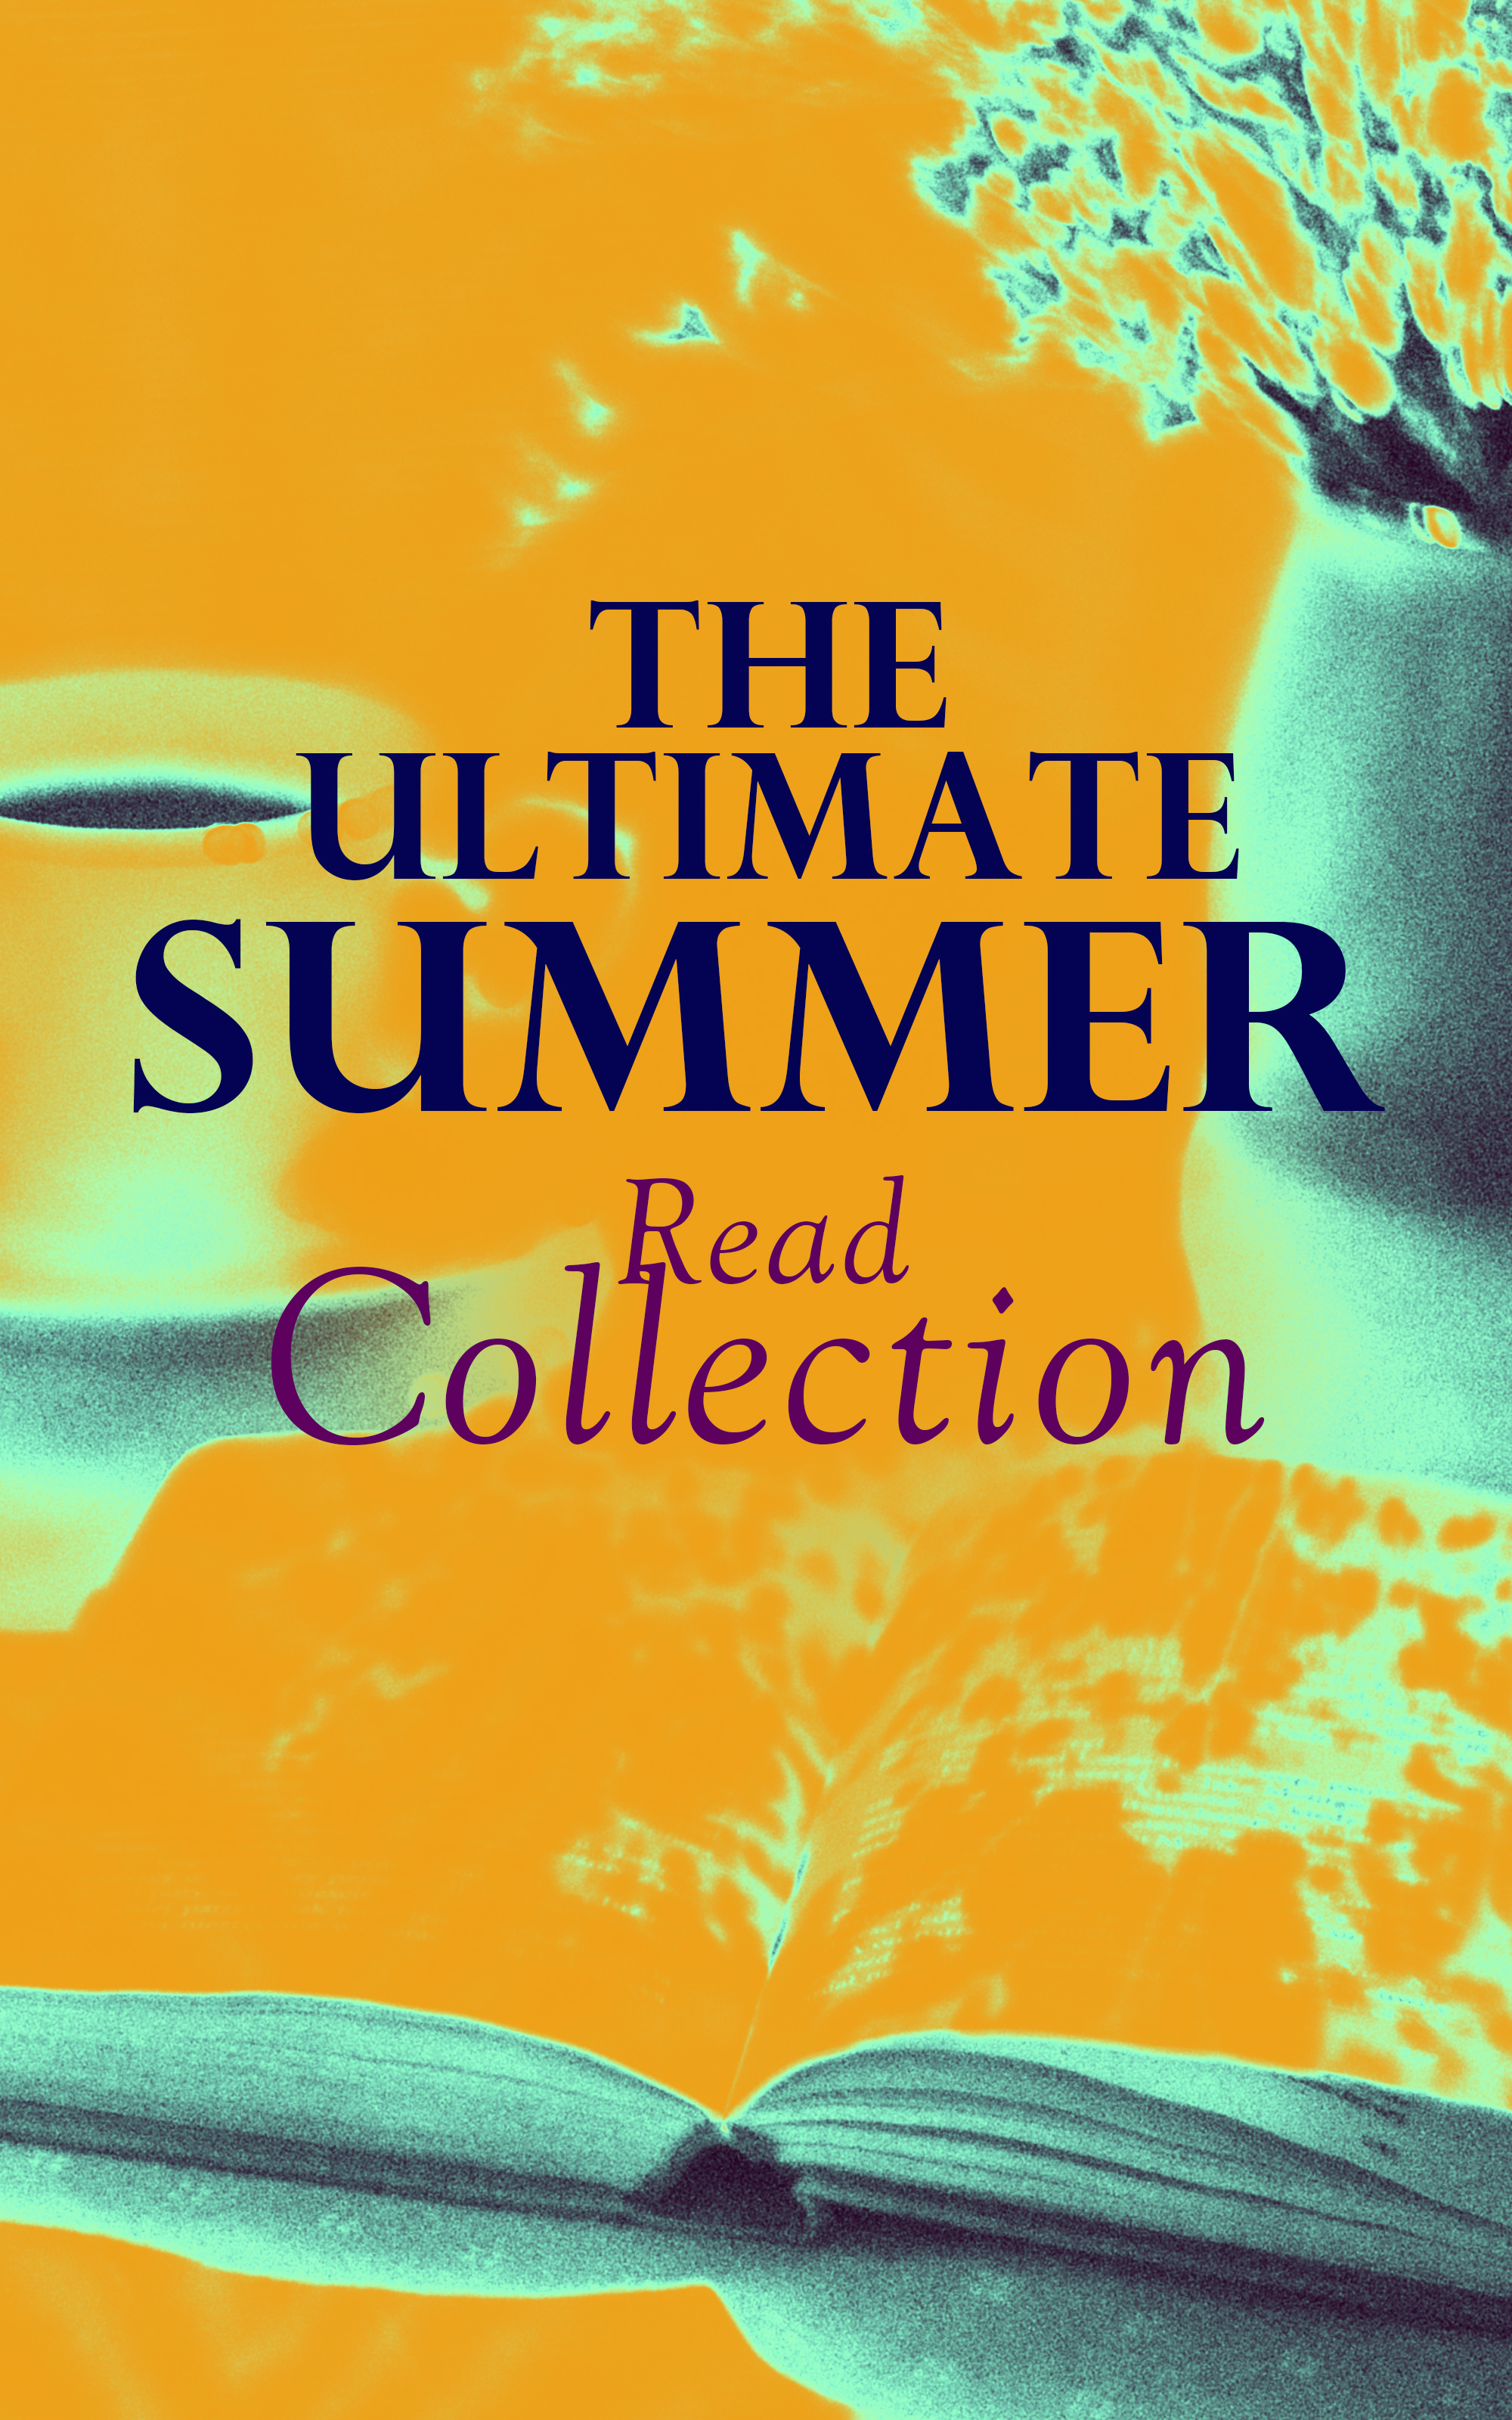 The Ultimate Summer Read Collection